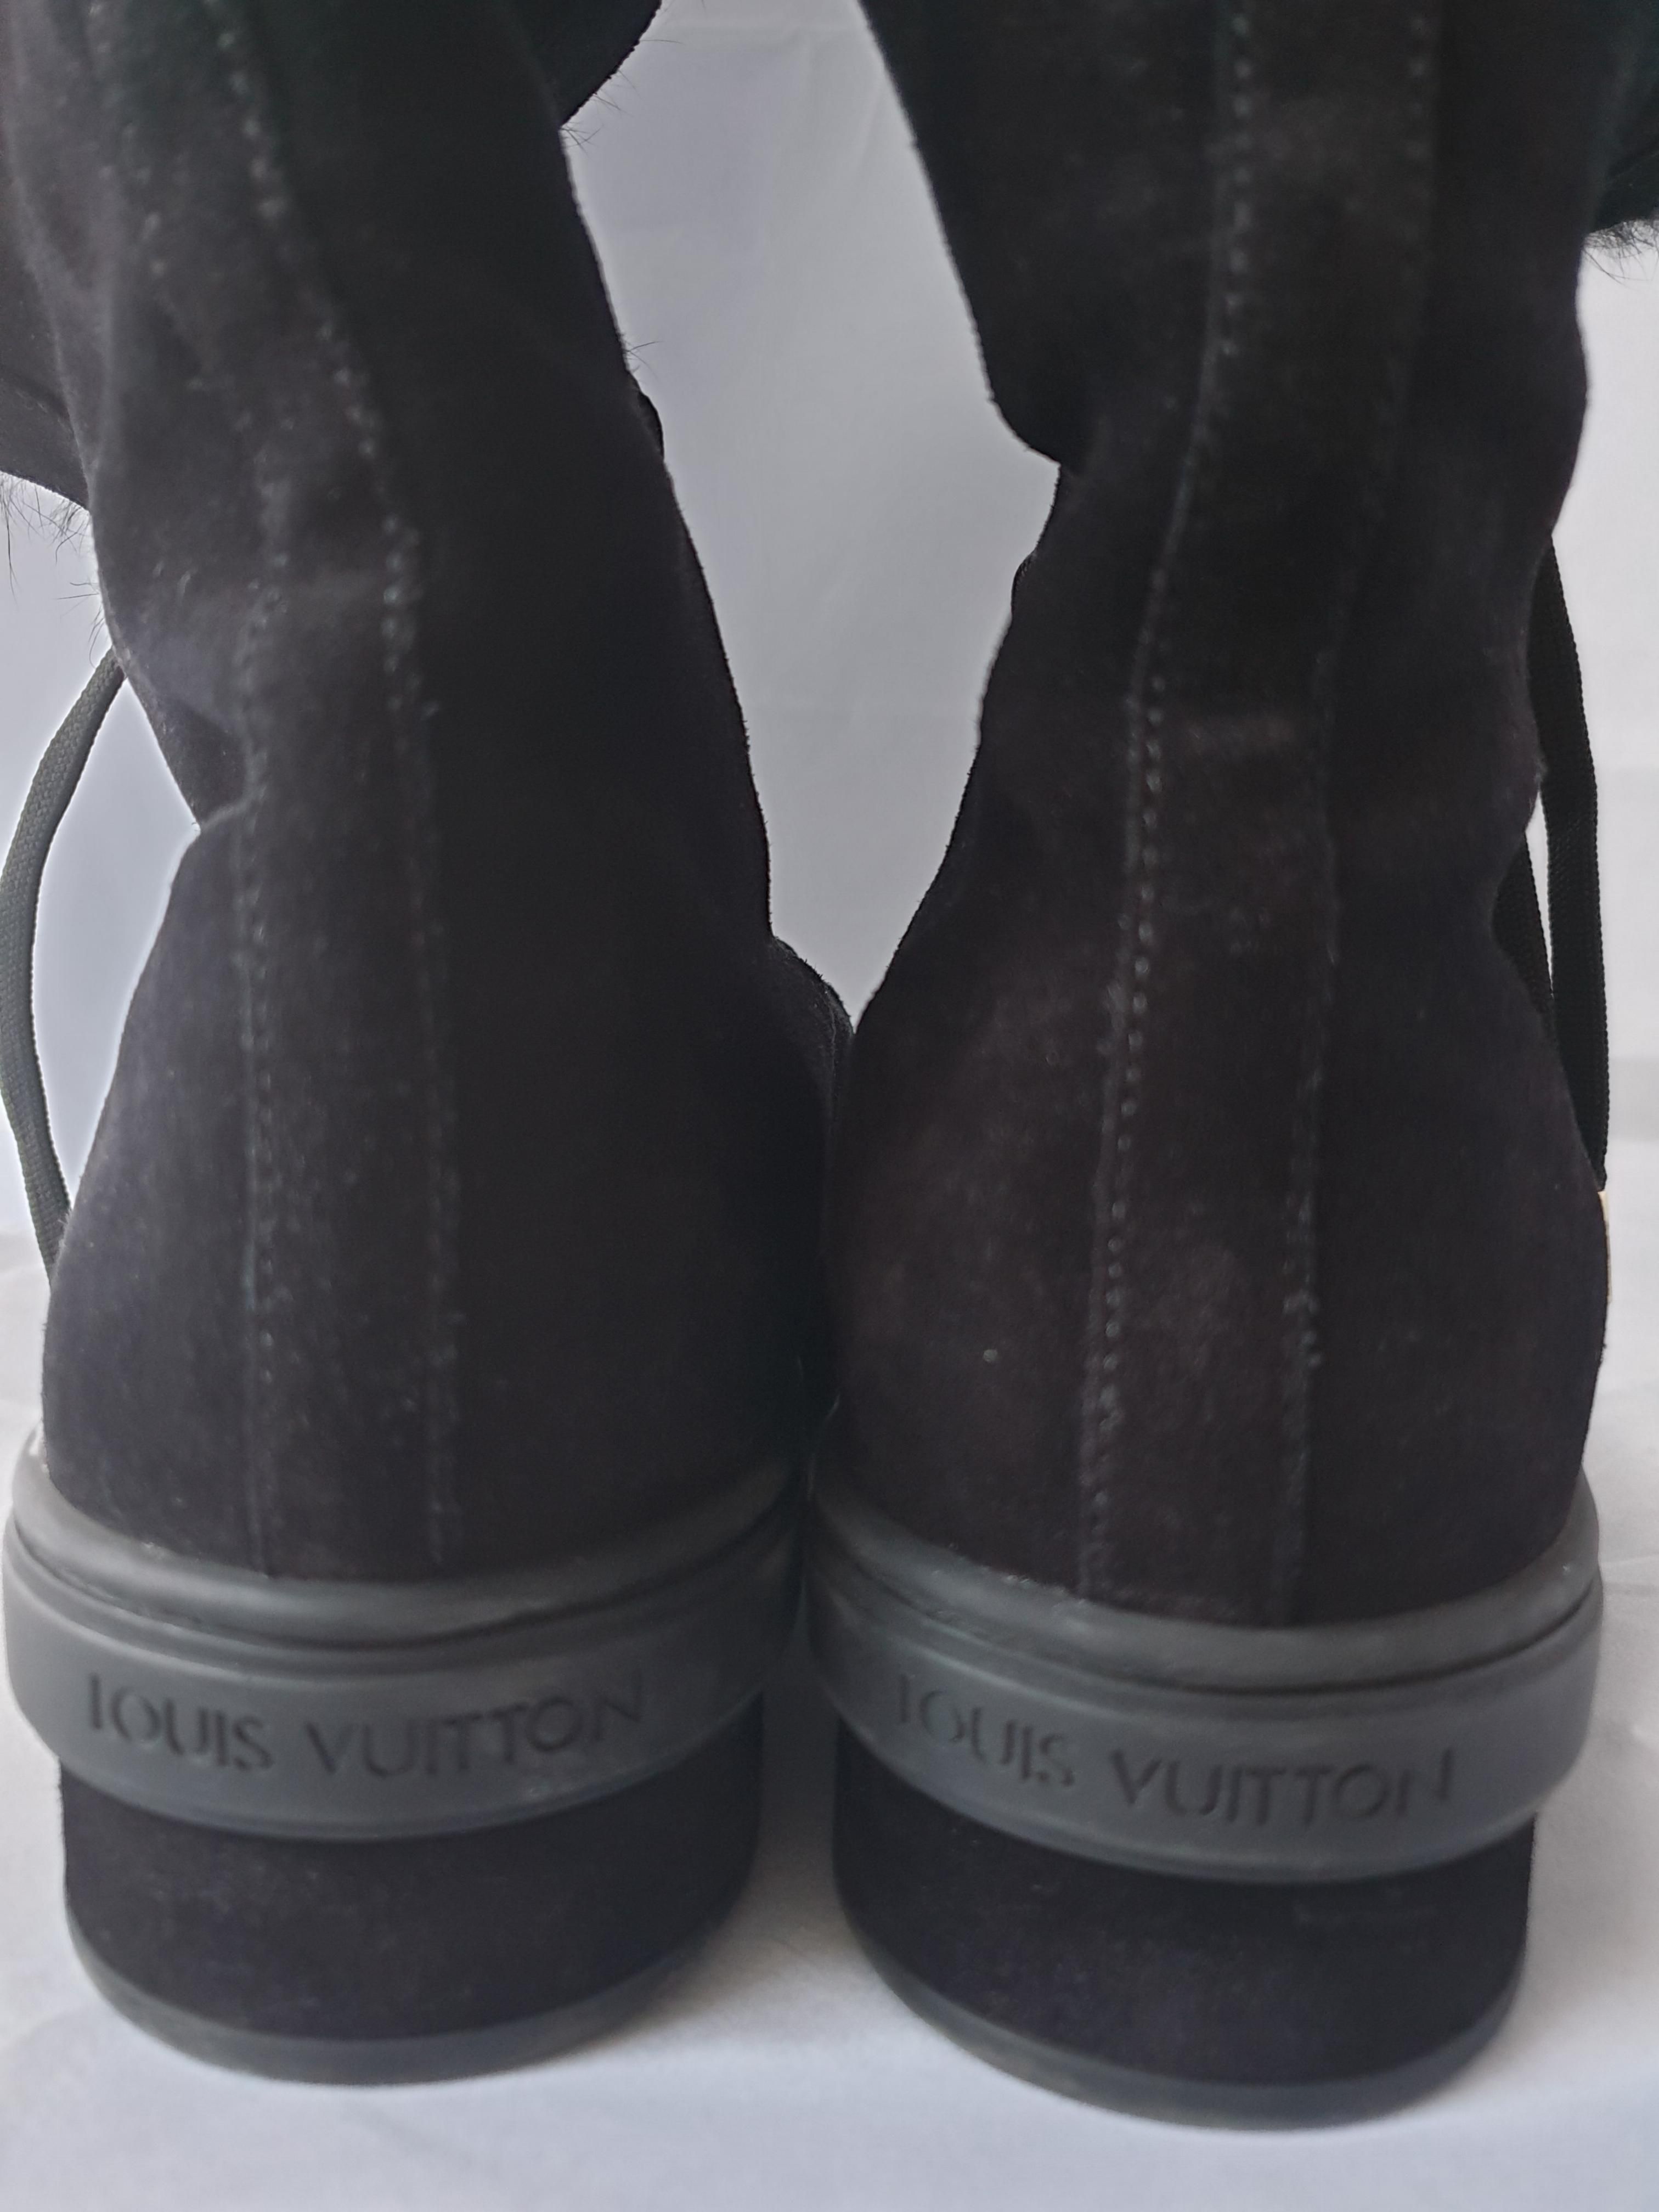 Louis Vuitton Black Suede Shearling Lined Boots | HEWI